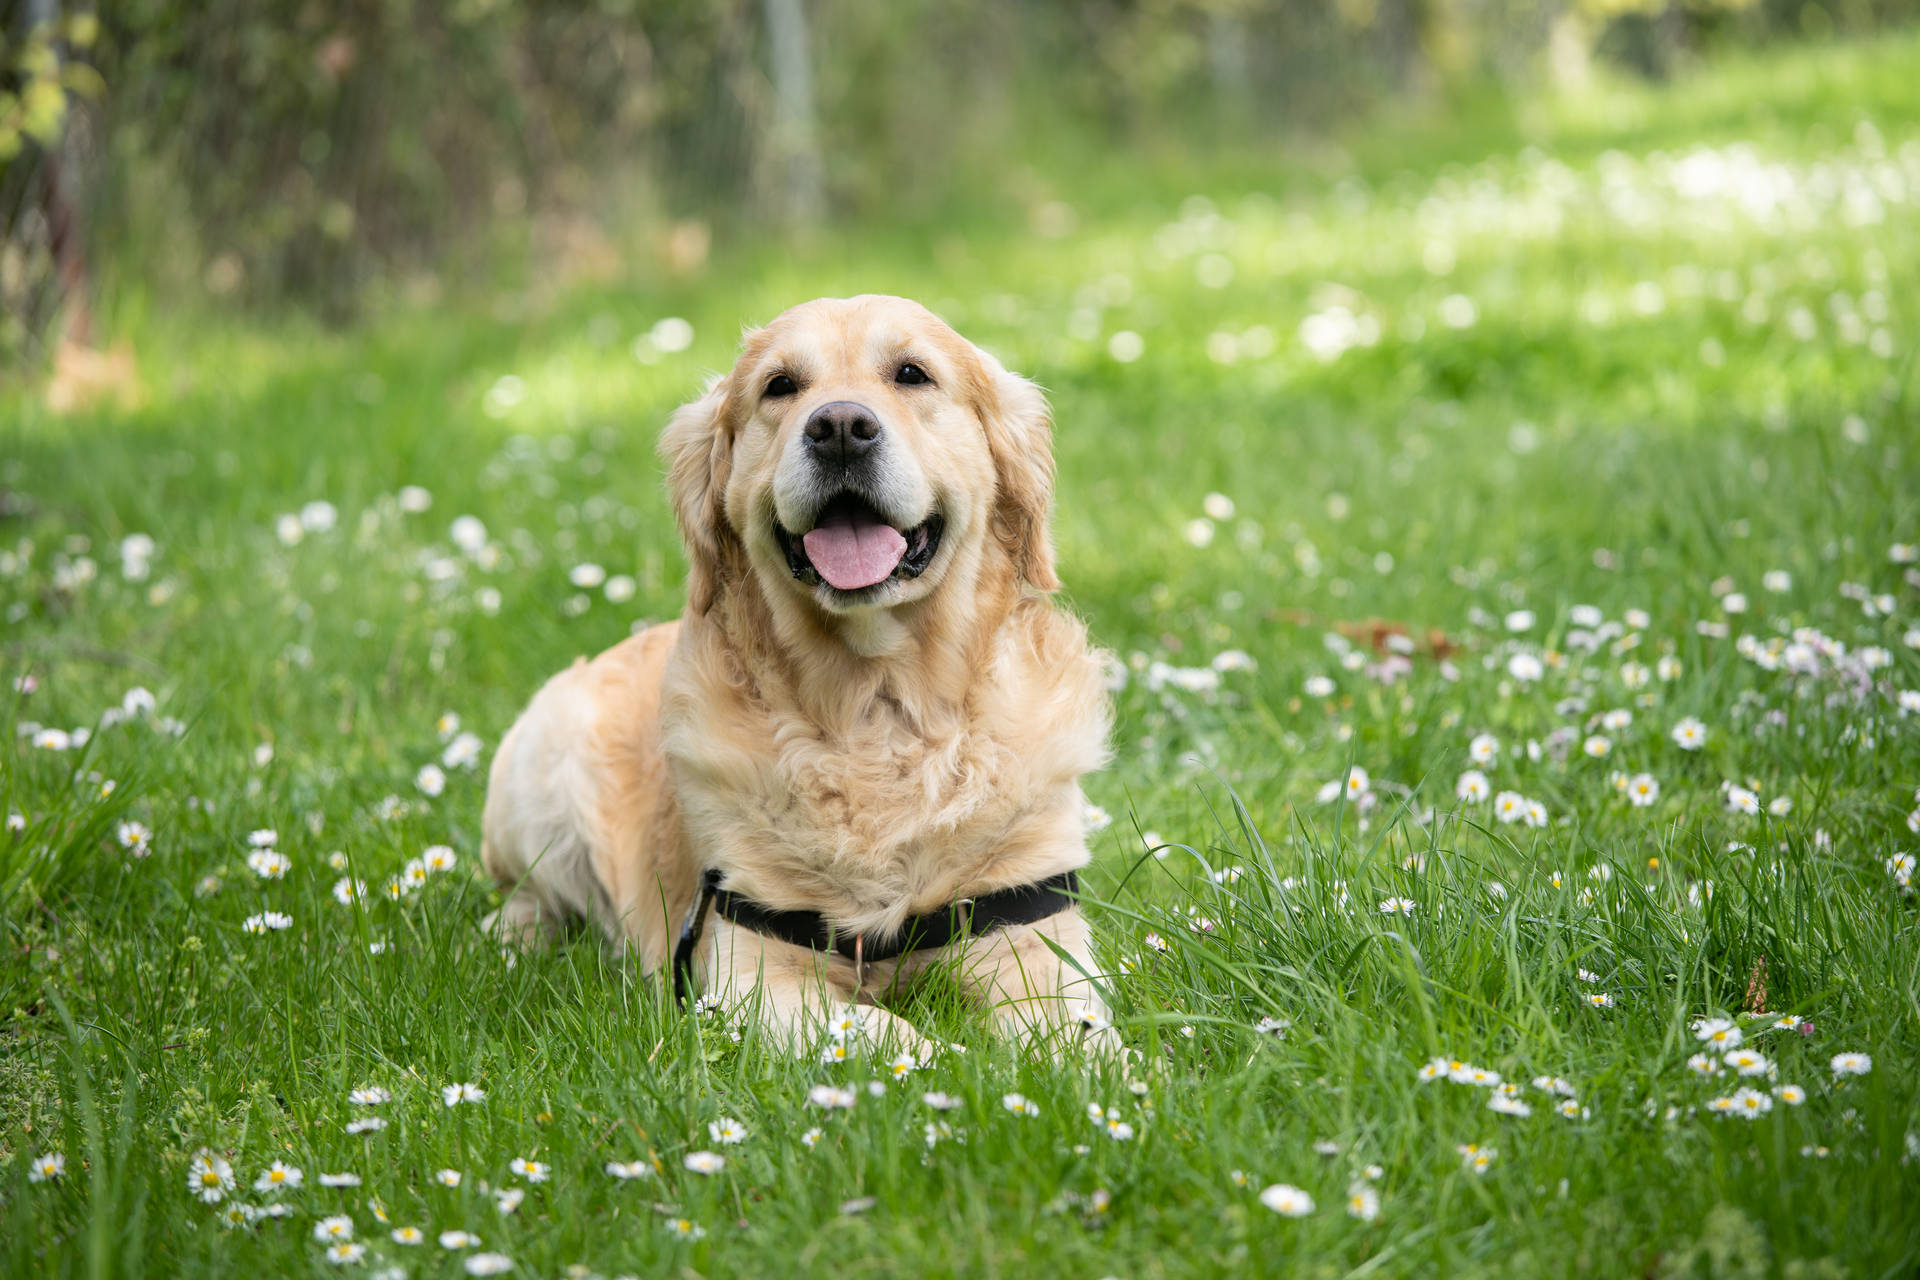 A beige puppy feeling content on a lush grassy field. Wallpaper